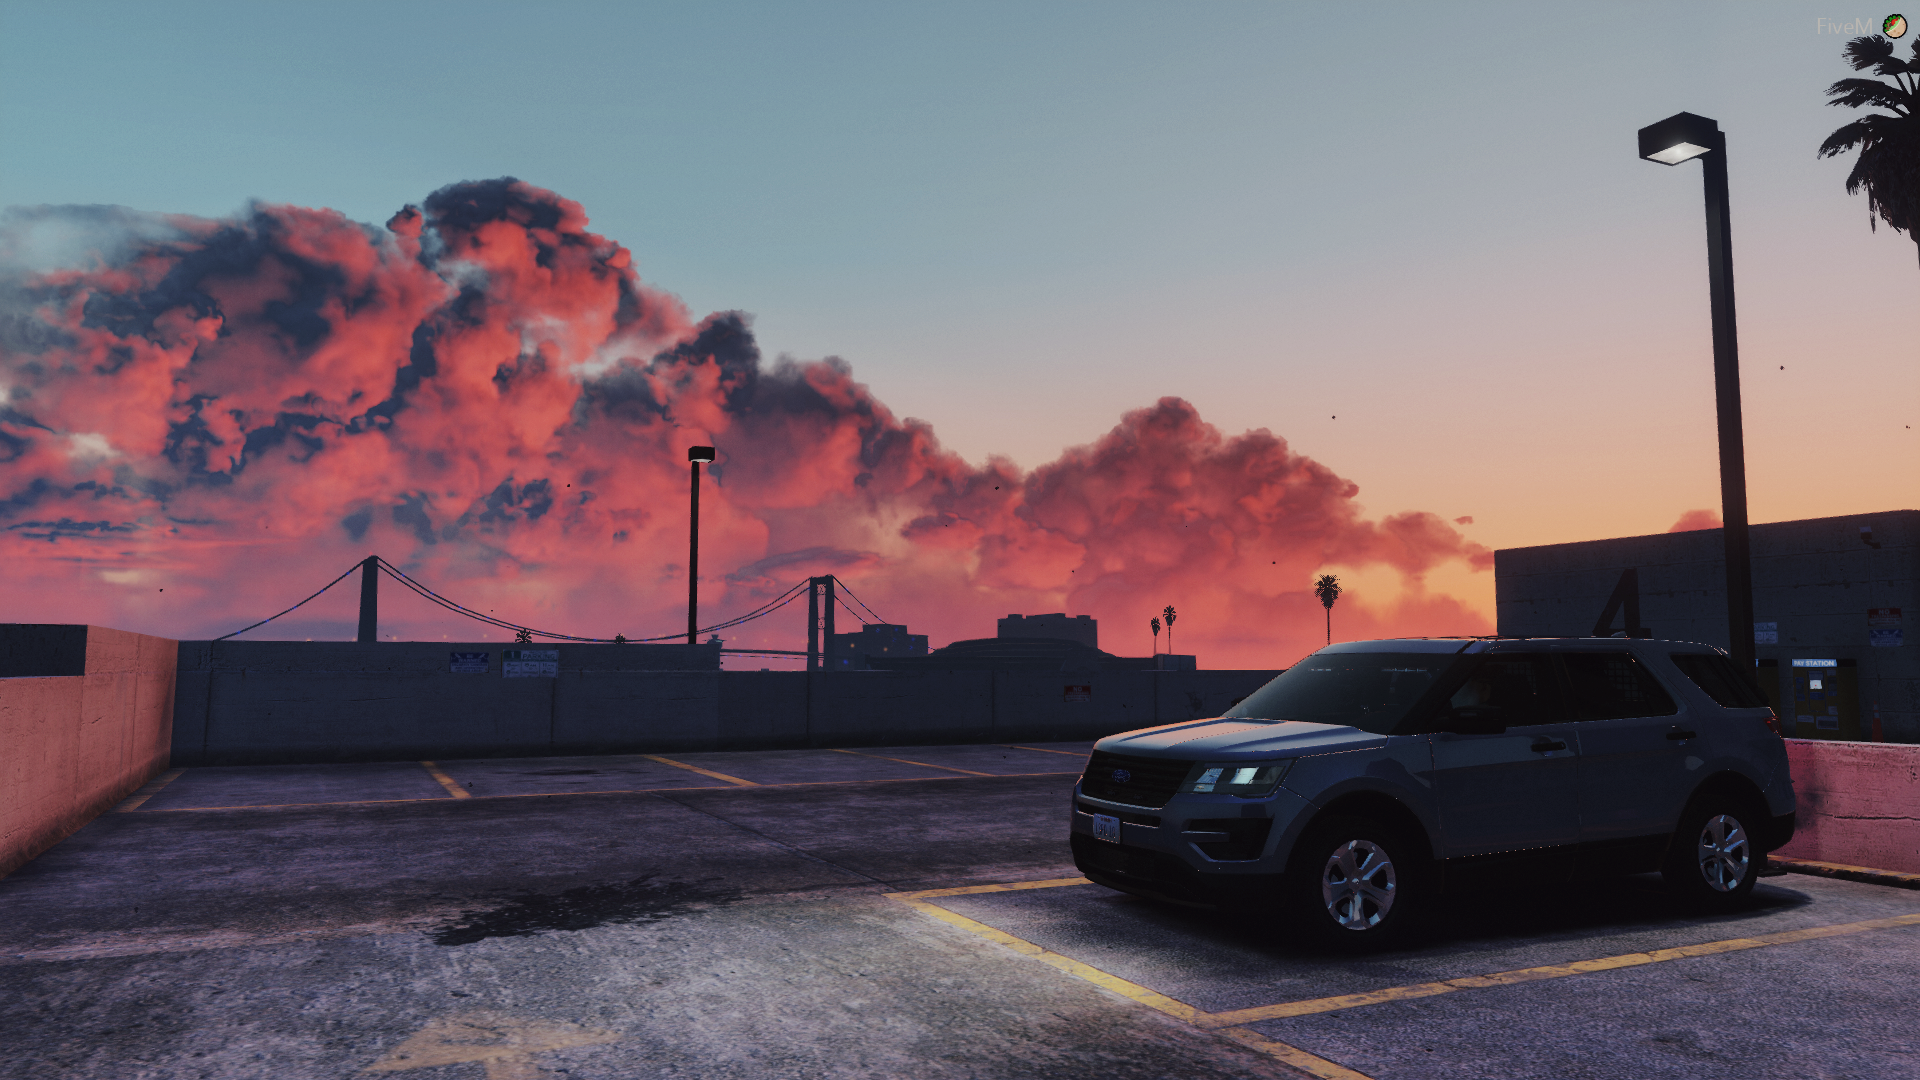 Sunset in Los Santos (10-12 with a Sergeant)